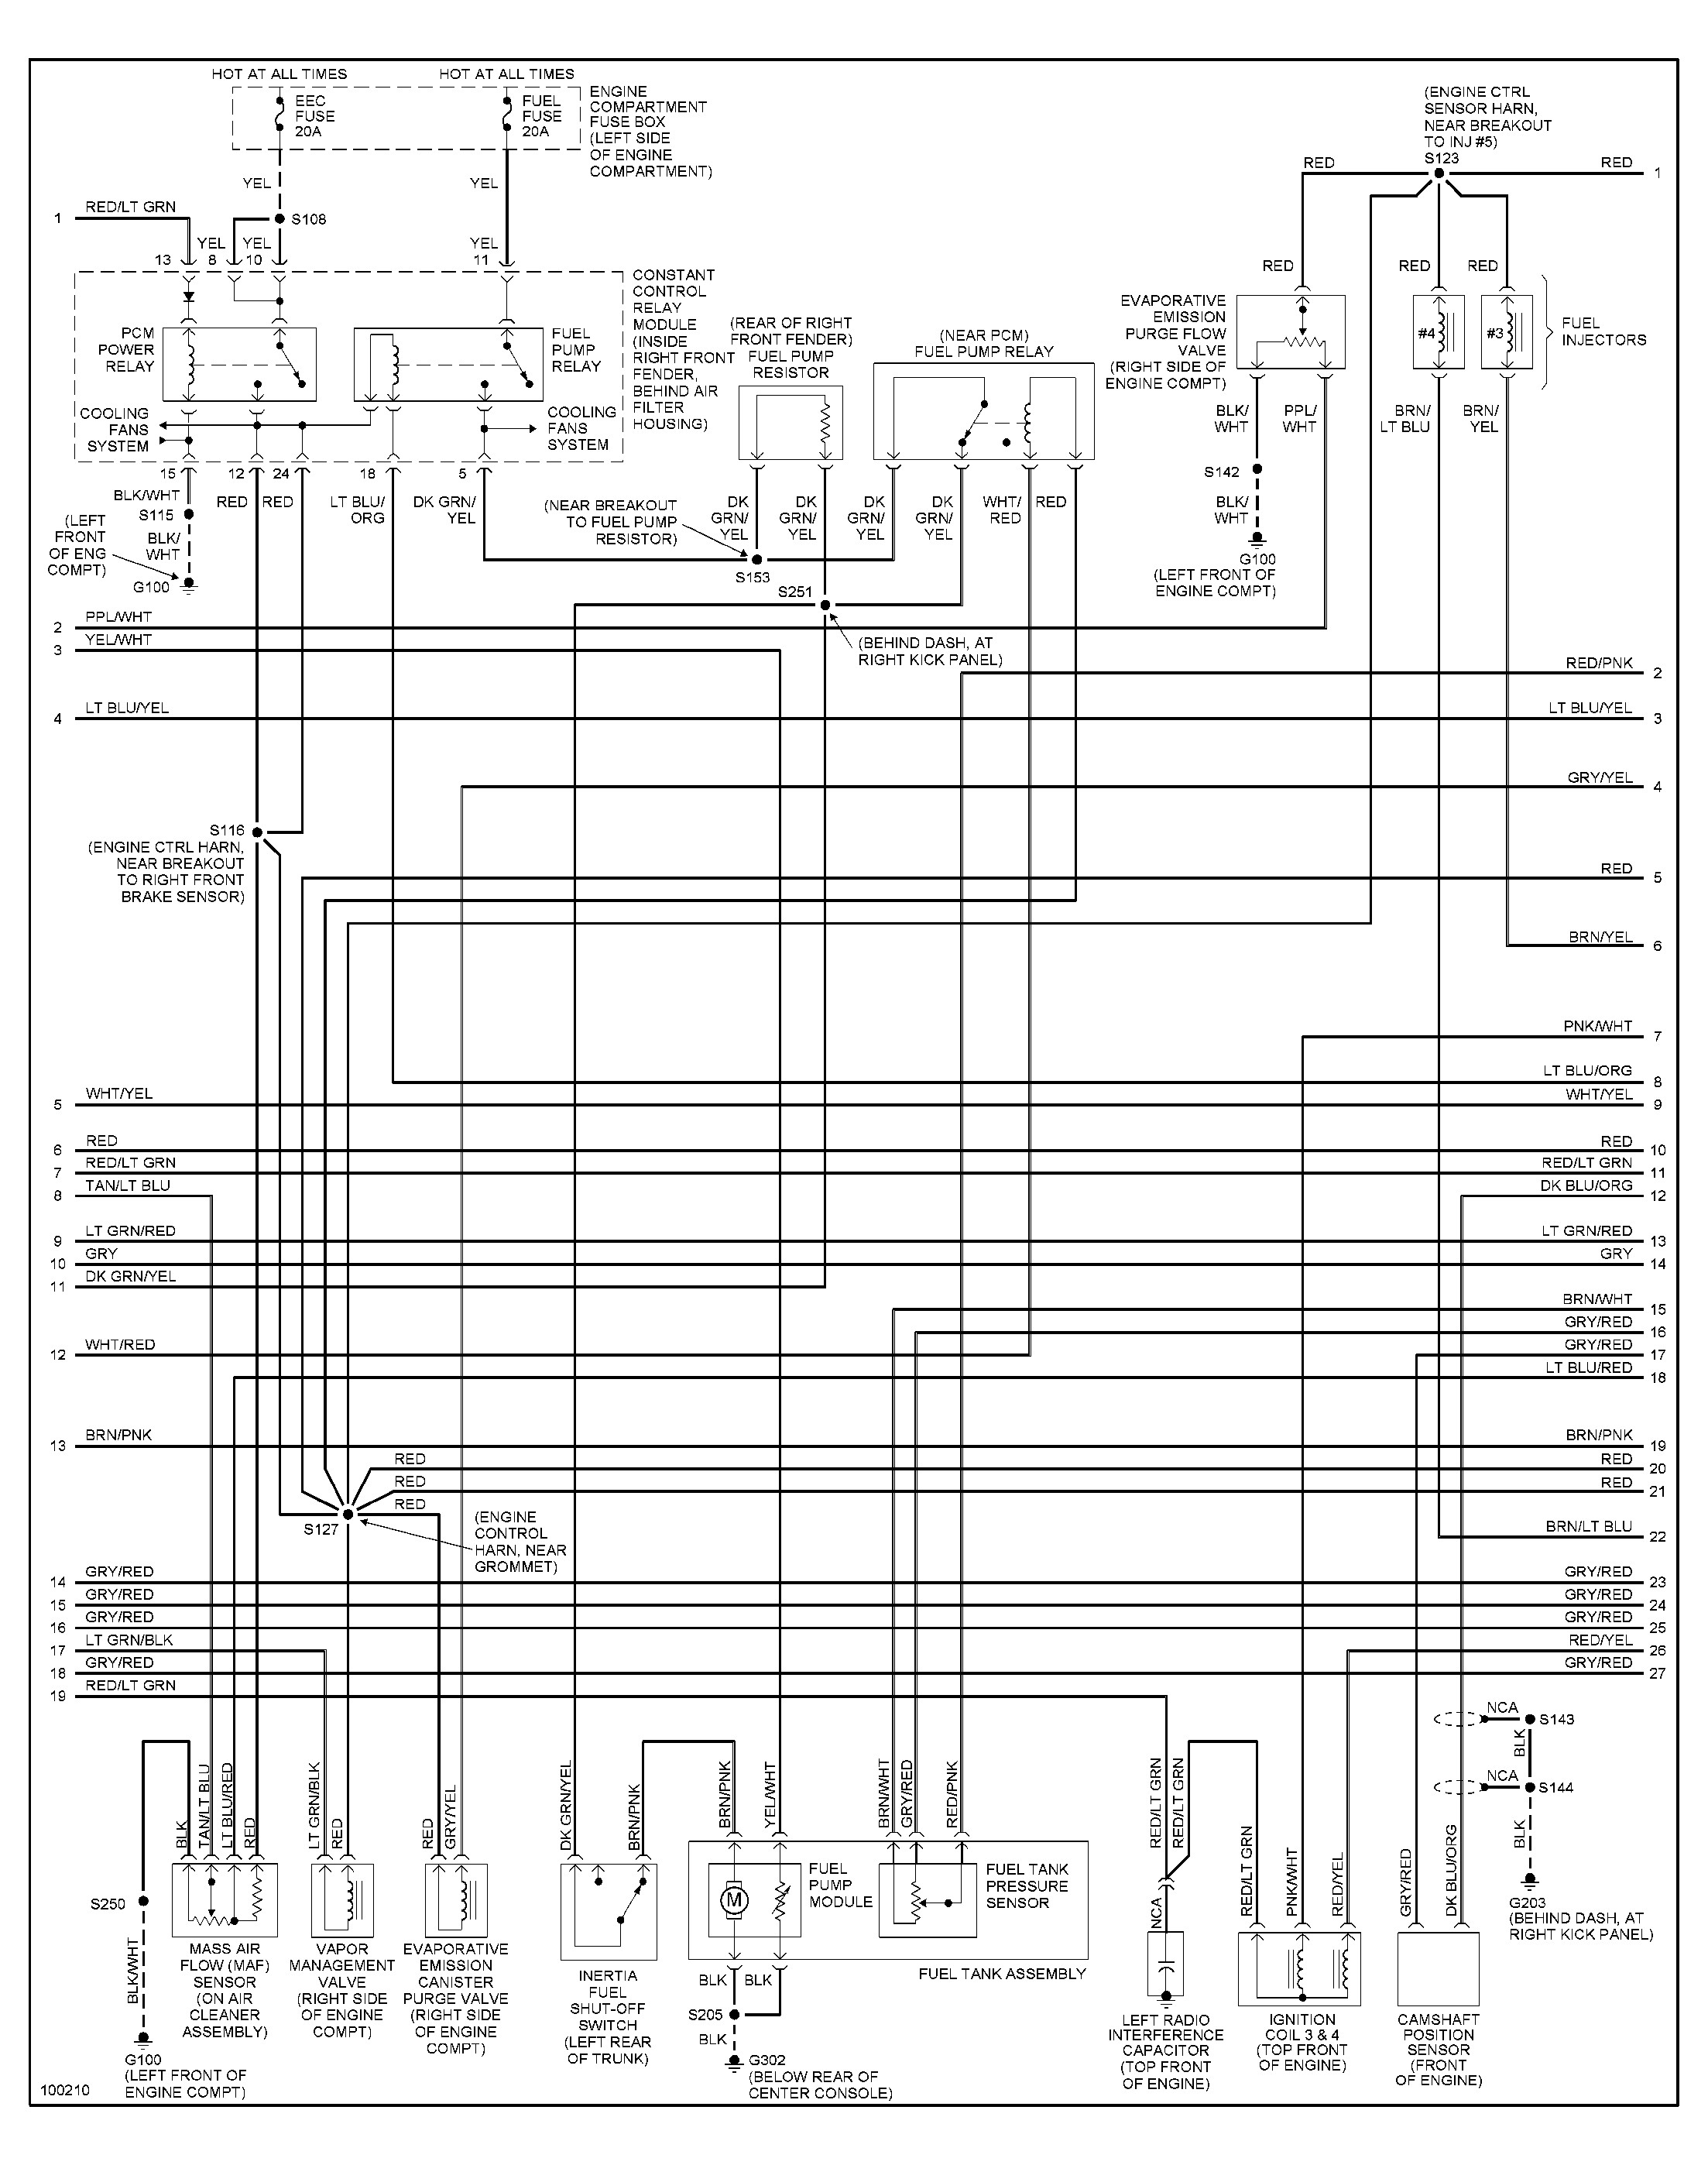 2002 ford Mustang Engine Diagram ford Mustang Gt 98 Fuel Pump Not Working Tried Checking at 1998 Of 2002 ford Mustang Engine Diagram